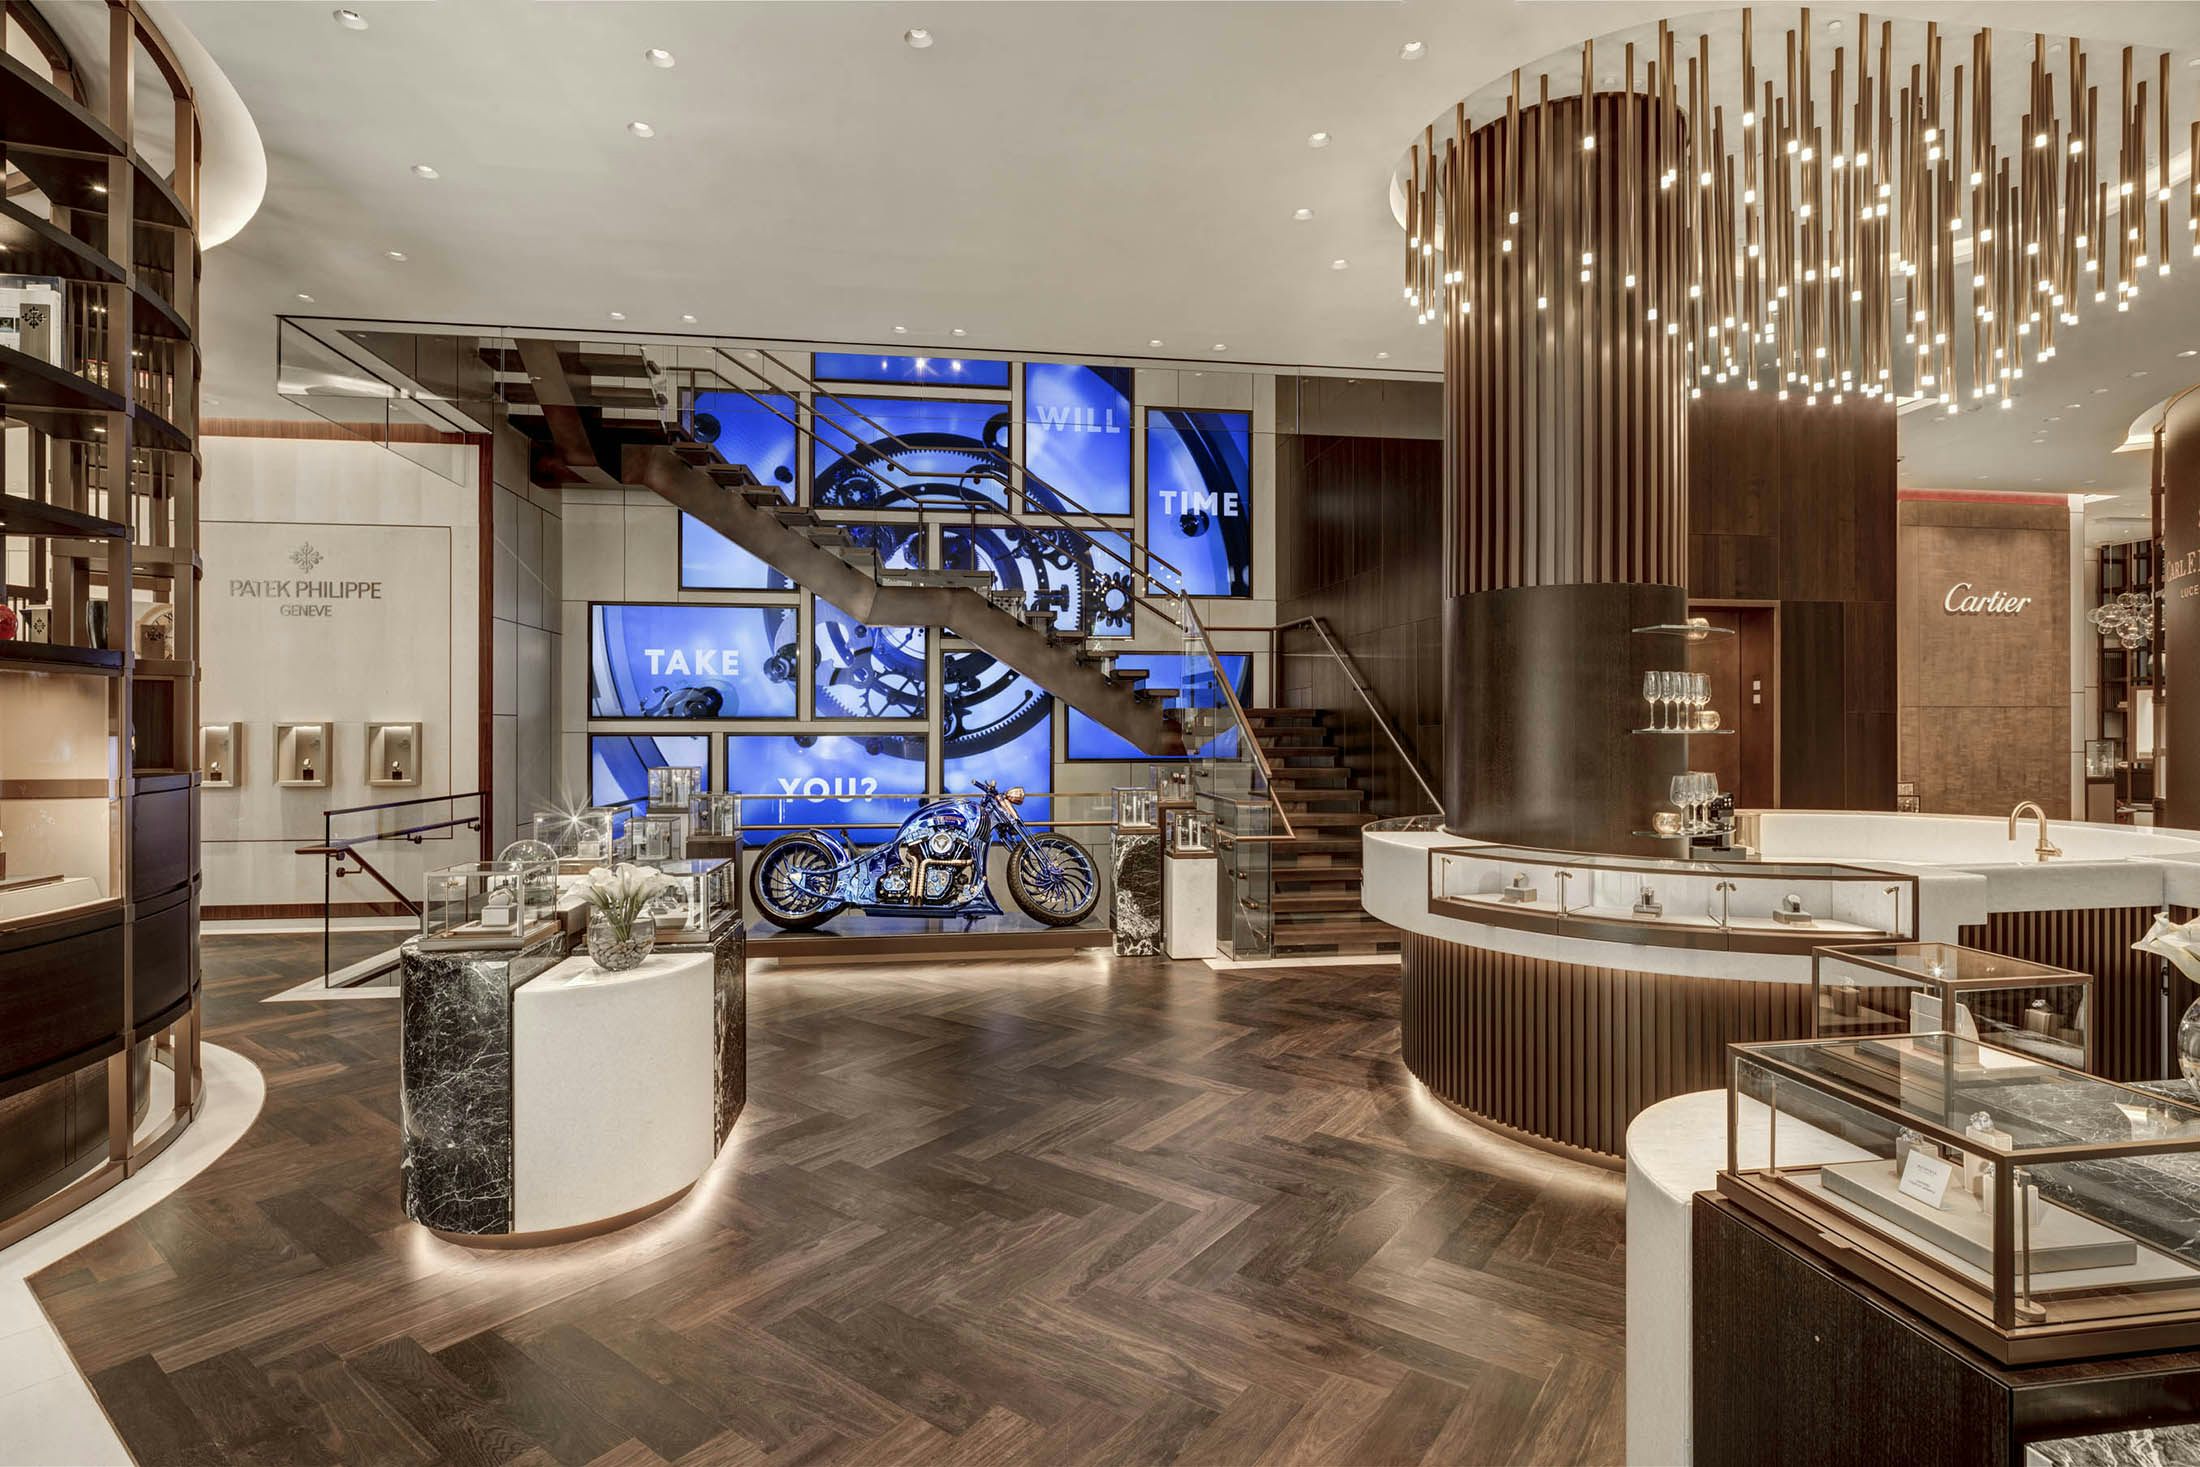 Luxury Brands Invest In Experiential Flagship Stores To Escape